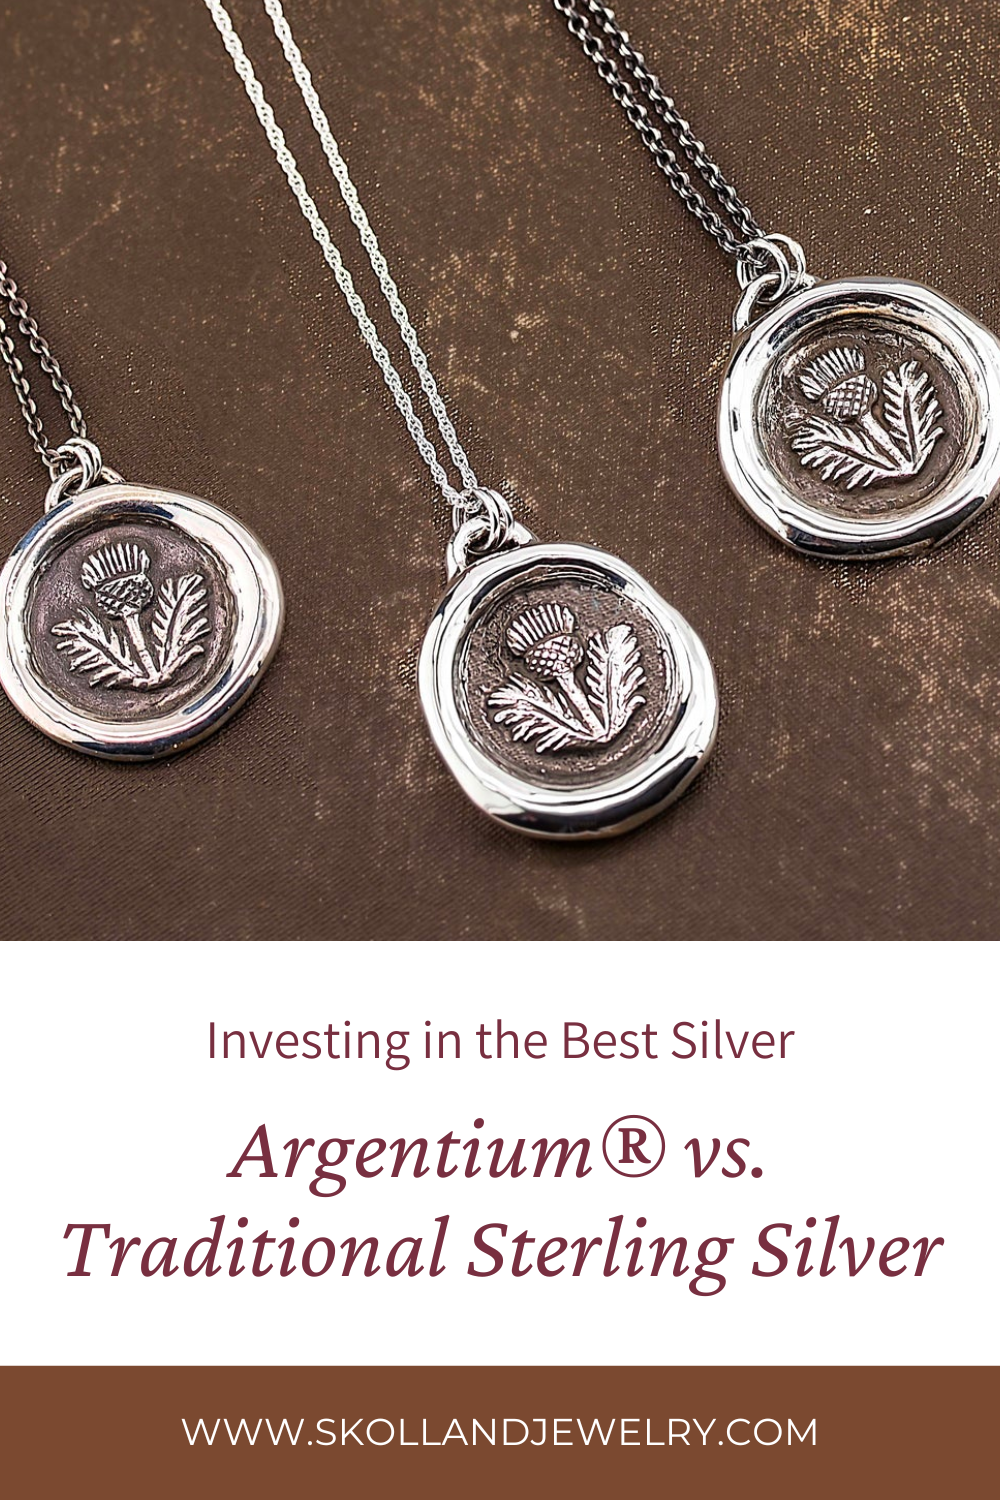 Investing inthe best silver. Argentium vs Traditional Sterling Silver. The image used above the text is of 3 argentium silver wax seal neckalces